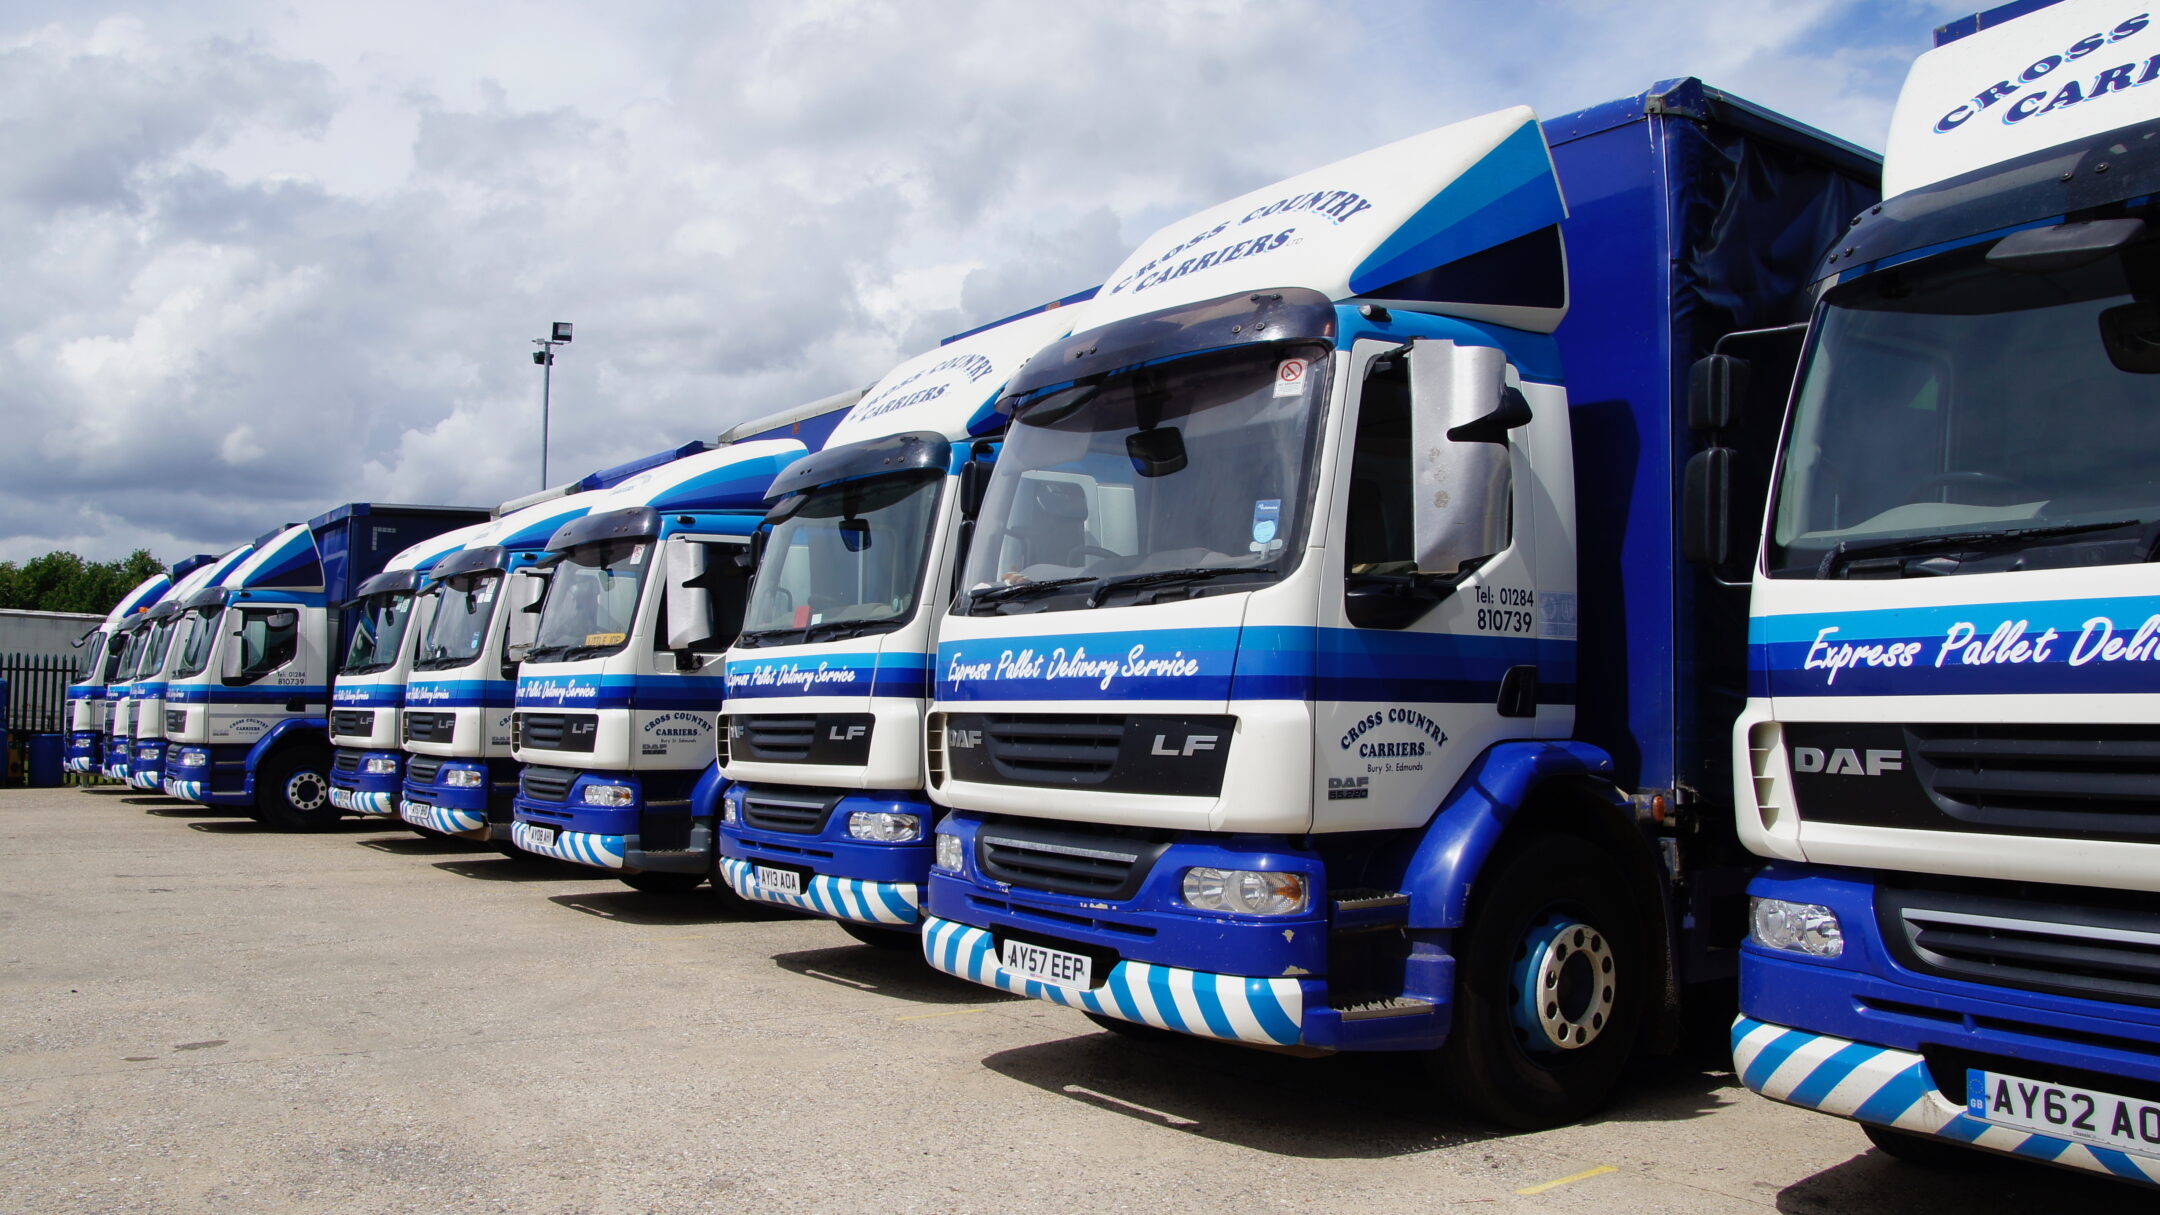 Contact us now about your haulage requirements